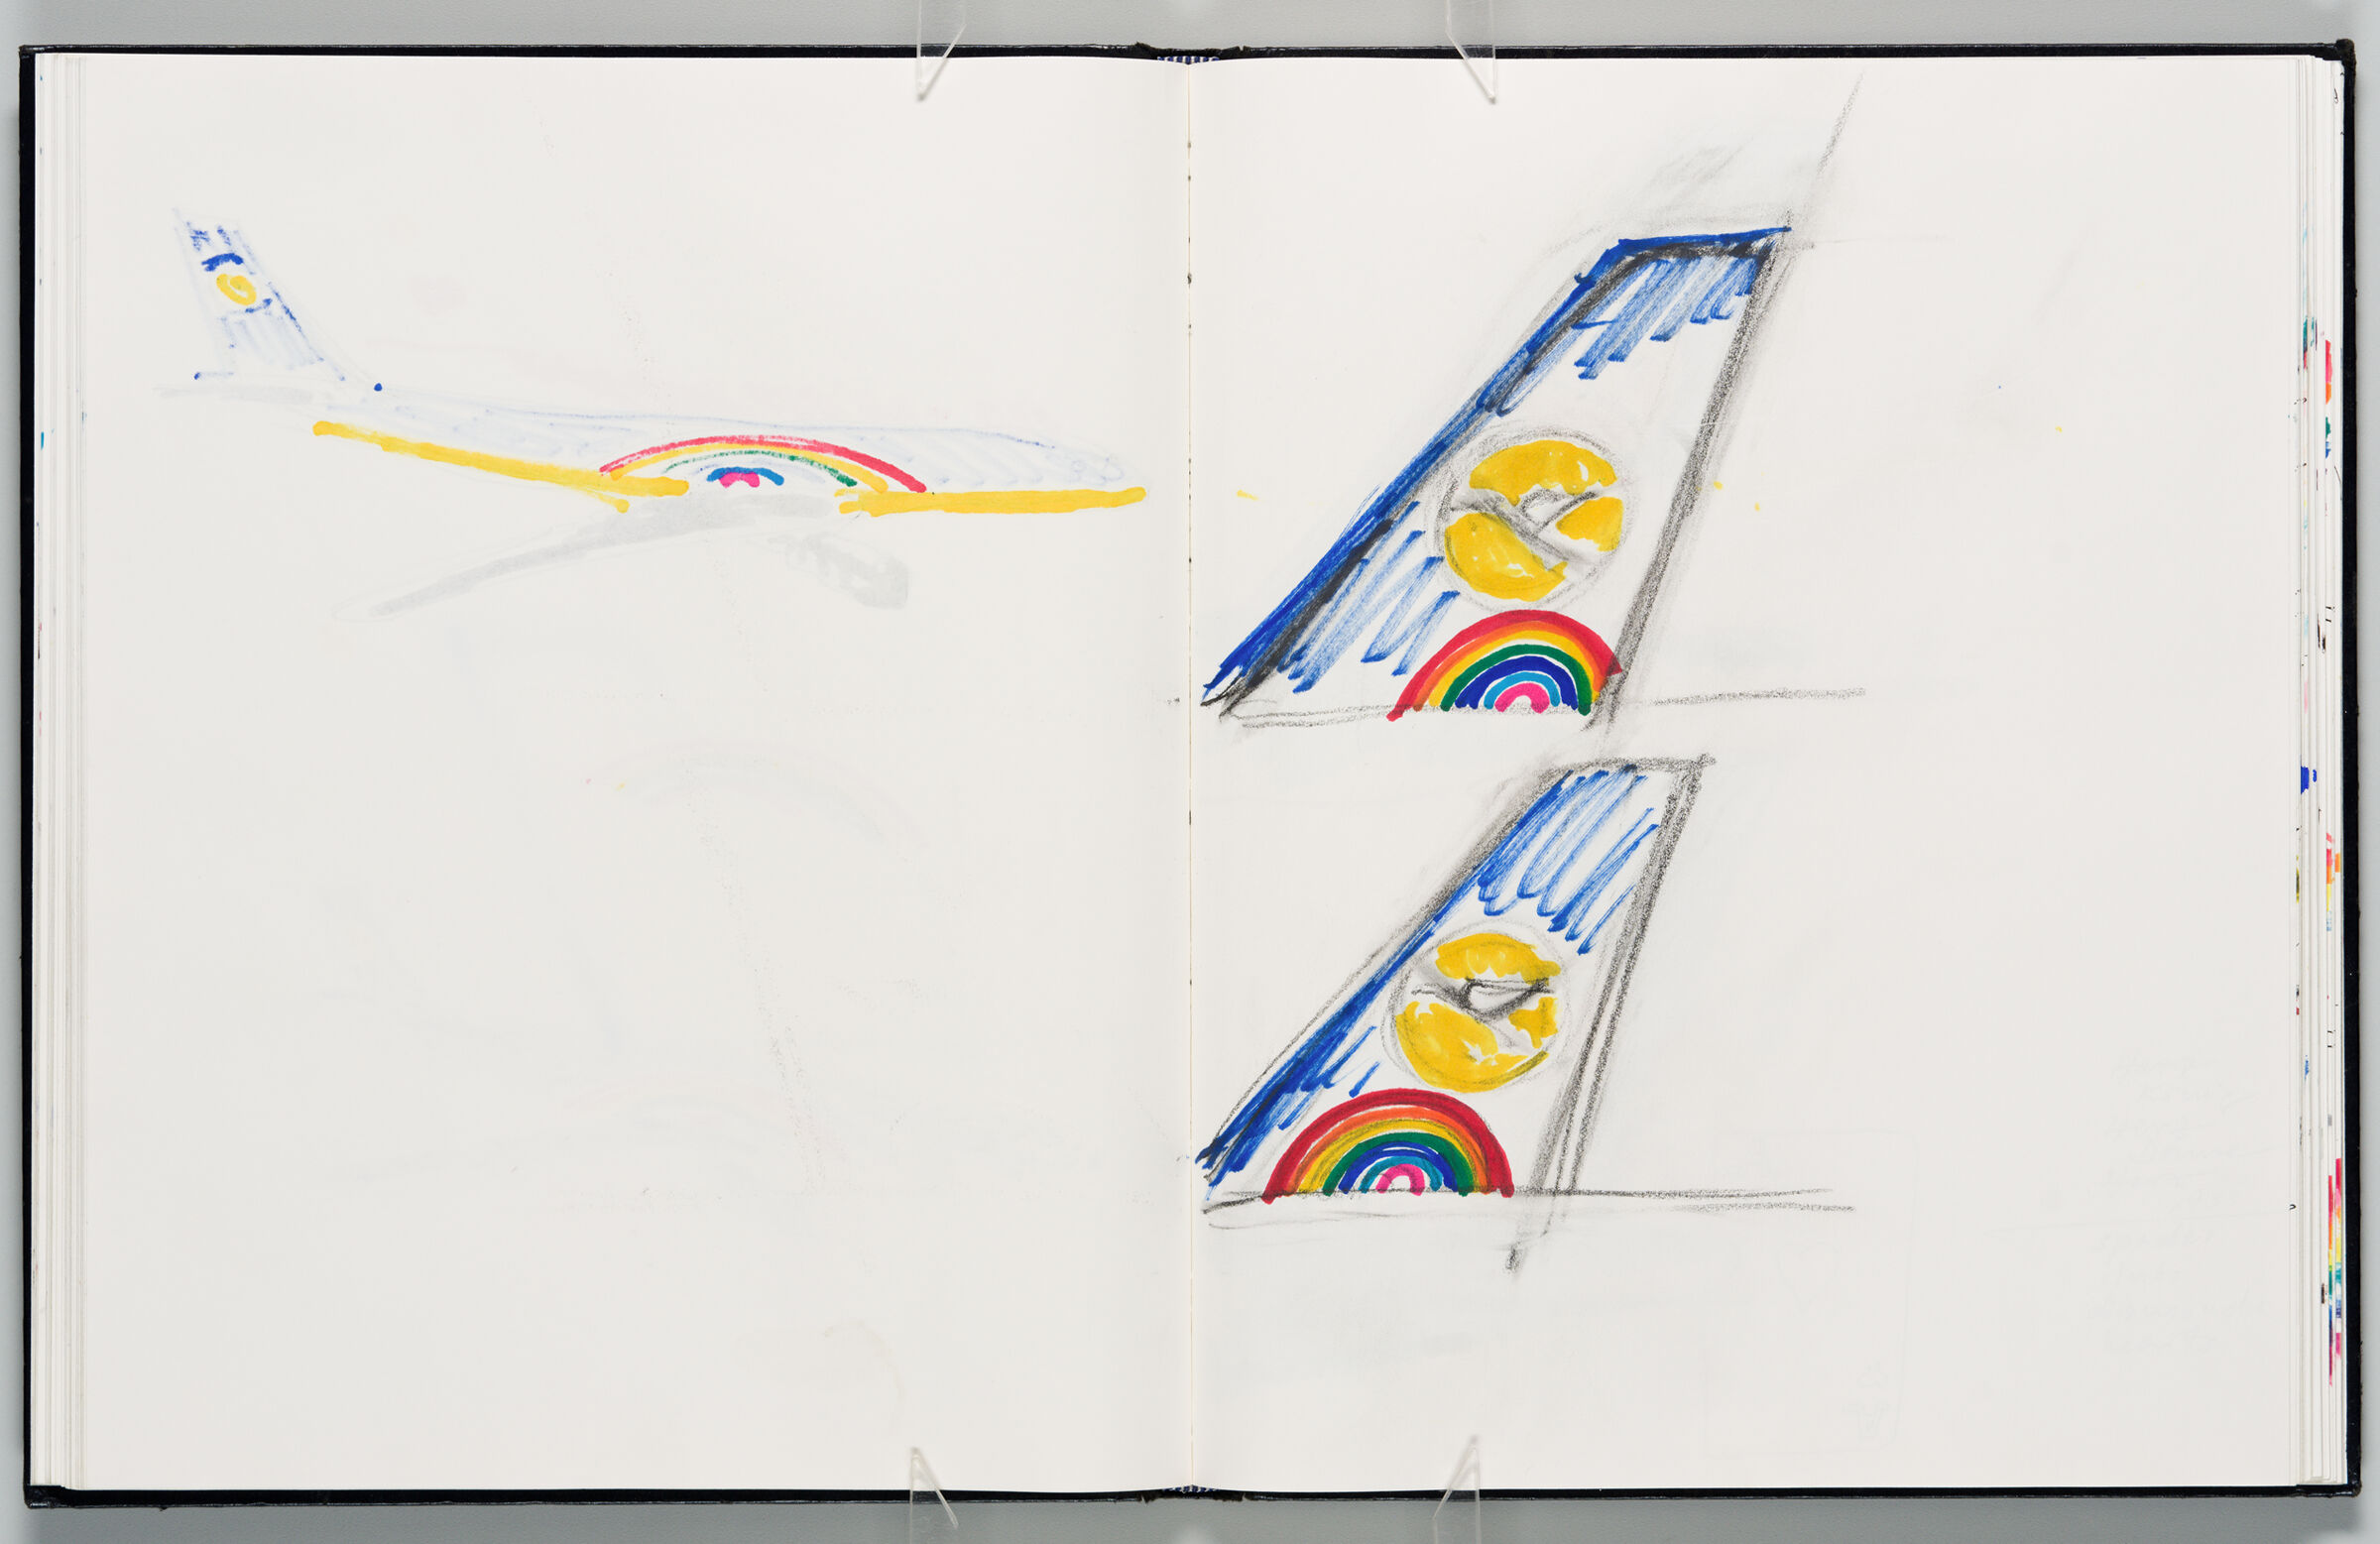 Untitled (Bleed-Through Of Previous Page, Left Page); Untitled (Rainbow Designs For Condor Planes, Right Page)